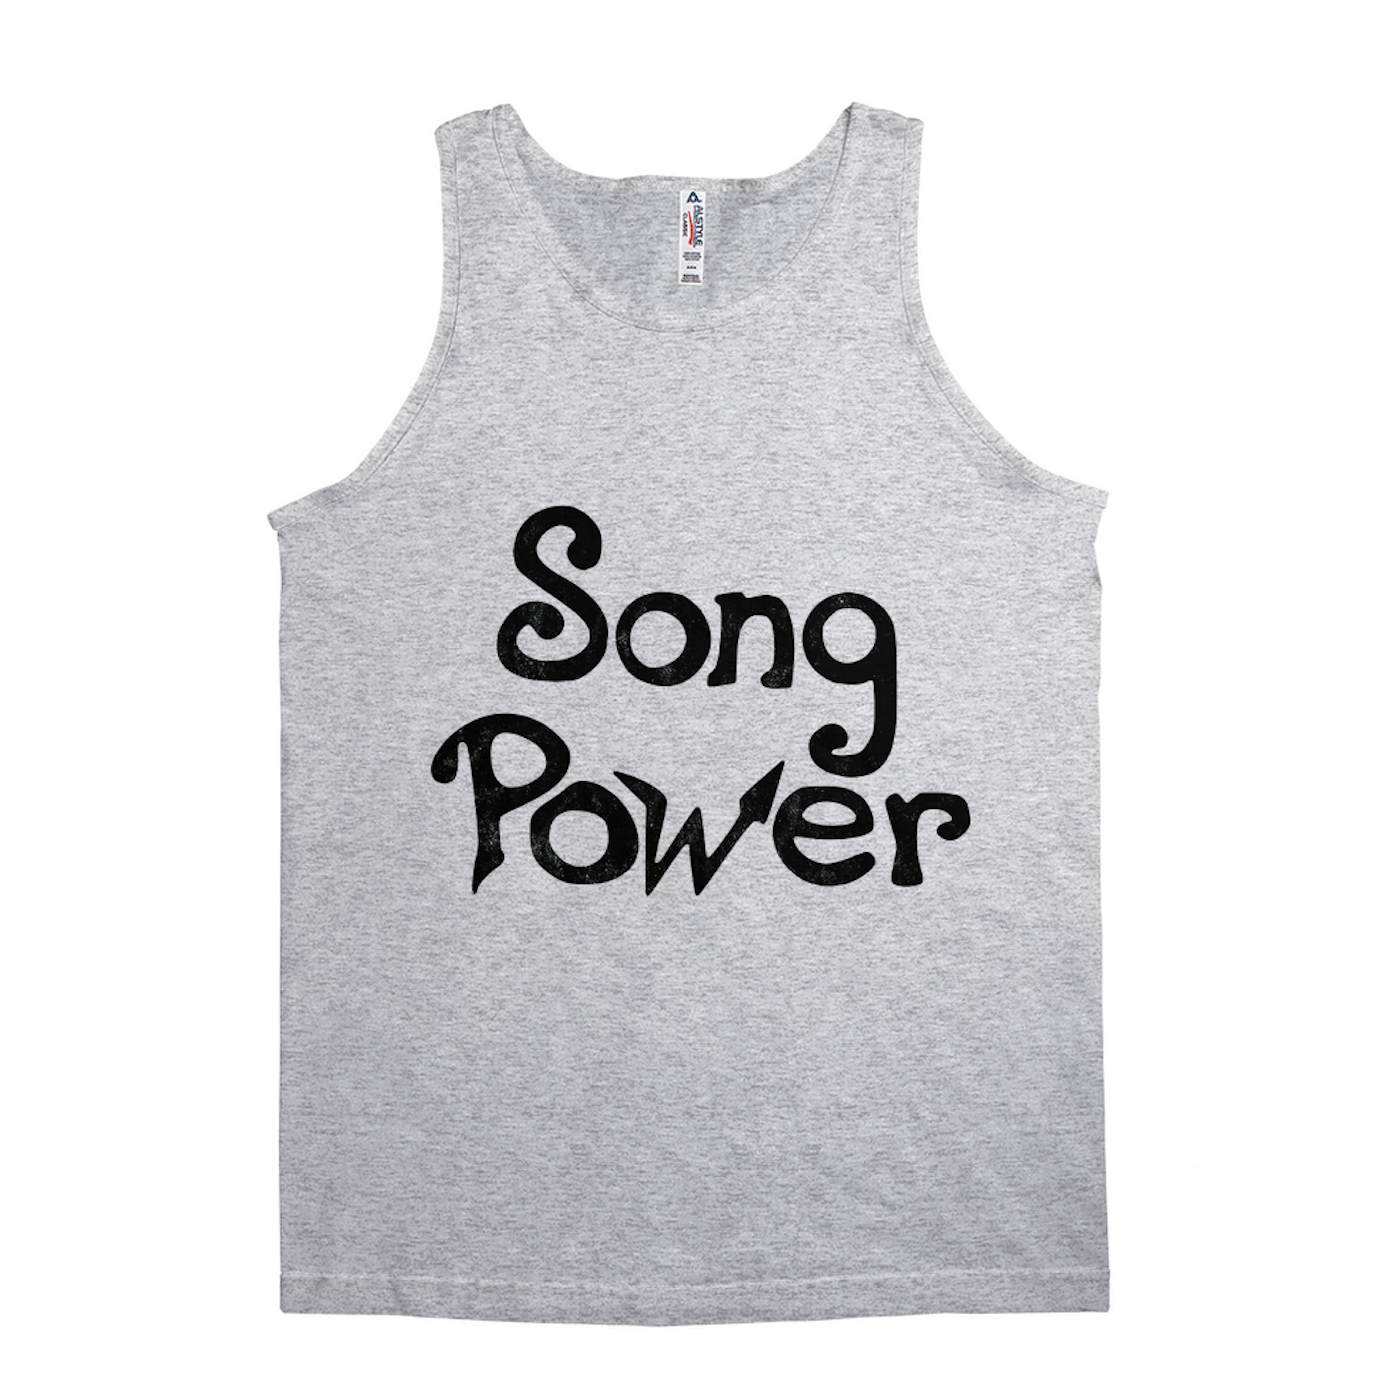 The Eagles Unisex Tank Top | Song Power Worn By Glenn Frey The Eagles Shirt